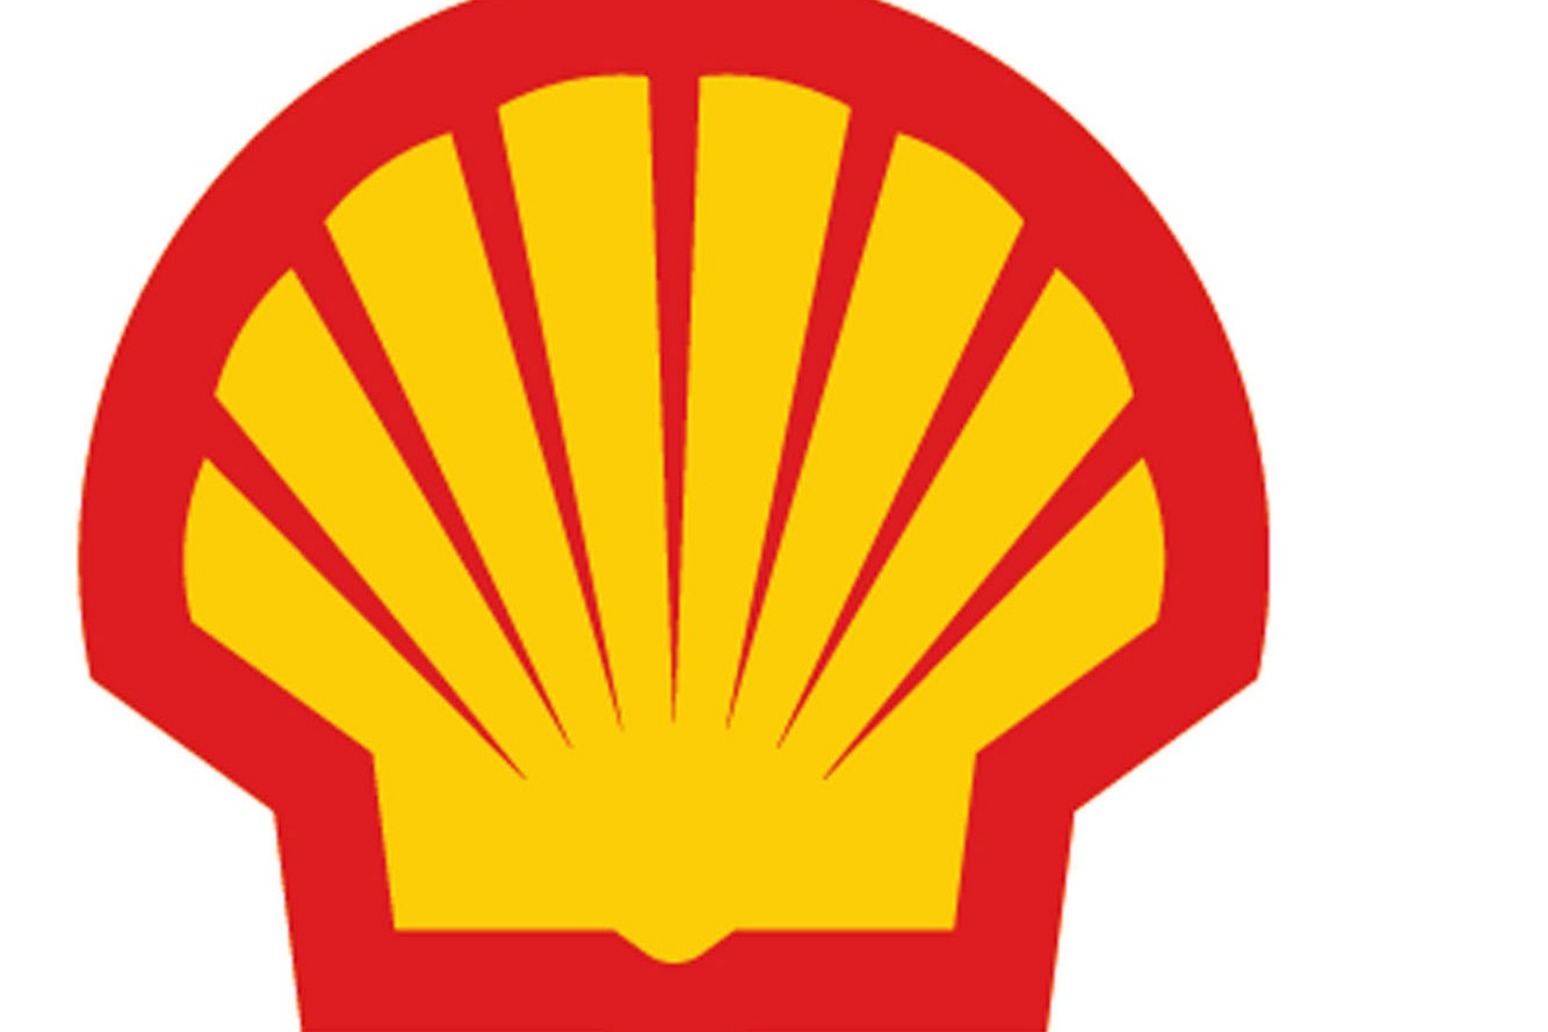 Shell Energy generates most broadband and home phone complaints to Ofcom 